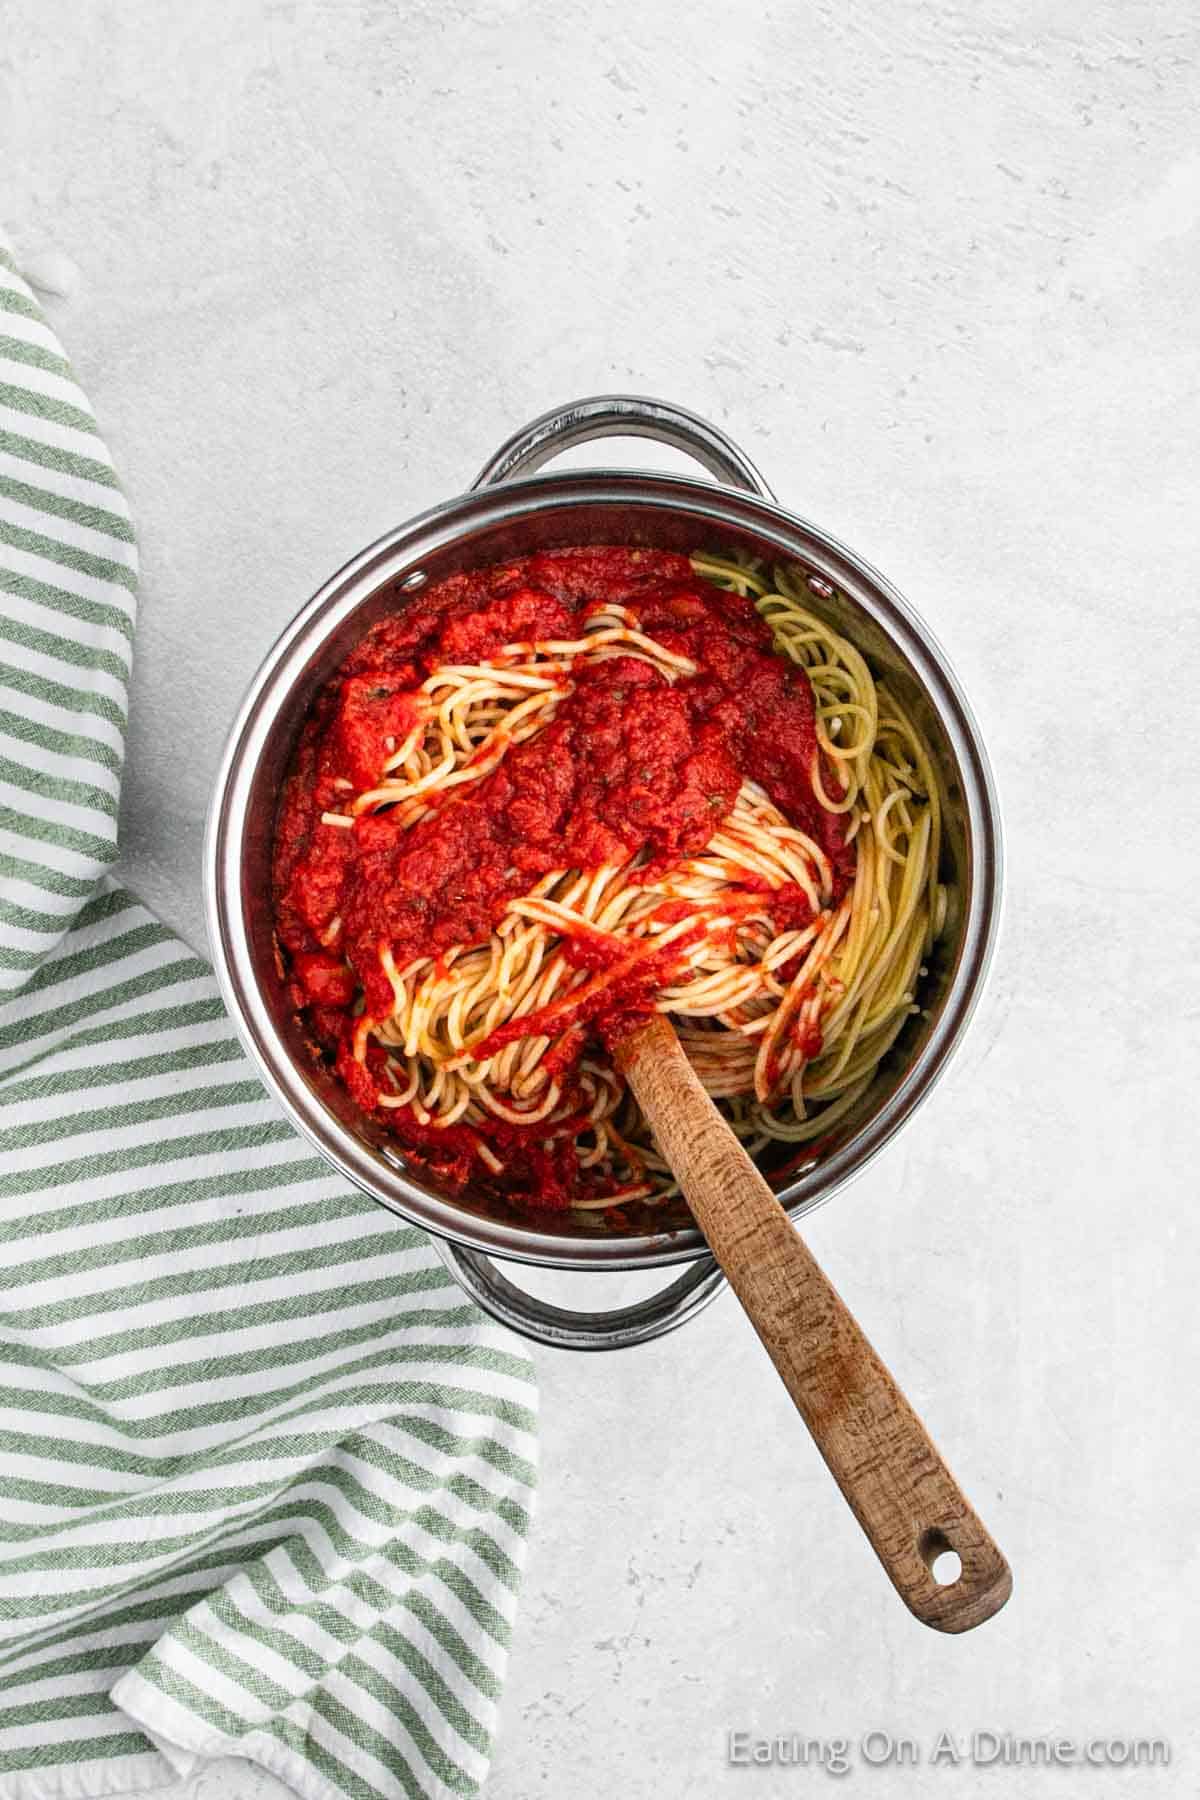 A stainless steel pot filled with cooked spaghetti intertwined with rich marinara sauce sits on a light gray surface. A wooden spoon rests in the pot, hinting at the secret to this million dollar spaghetti recipe. A green and white striped cloth is partially visible to the side.